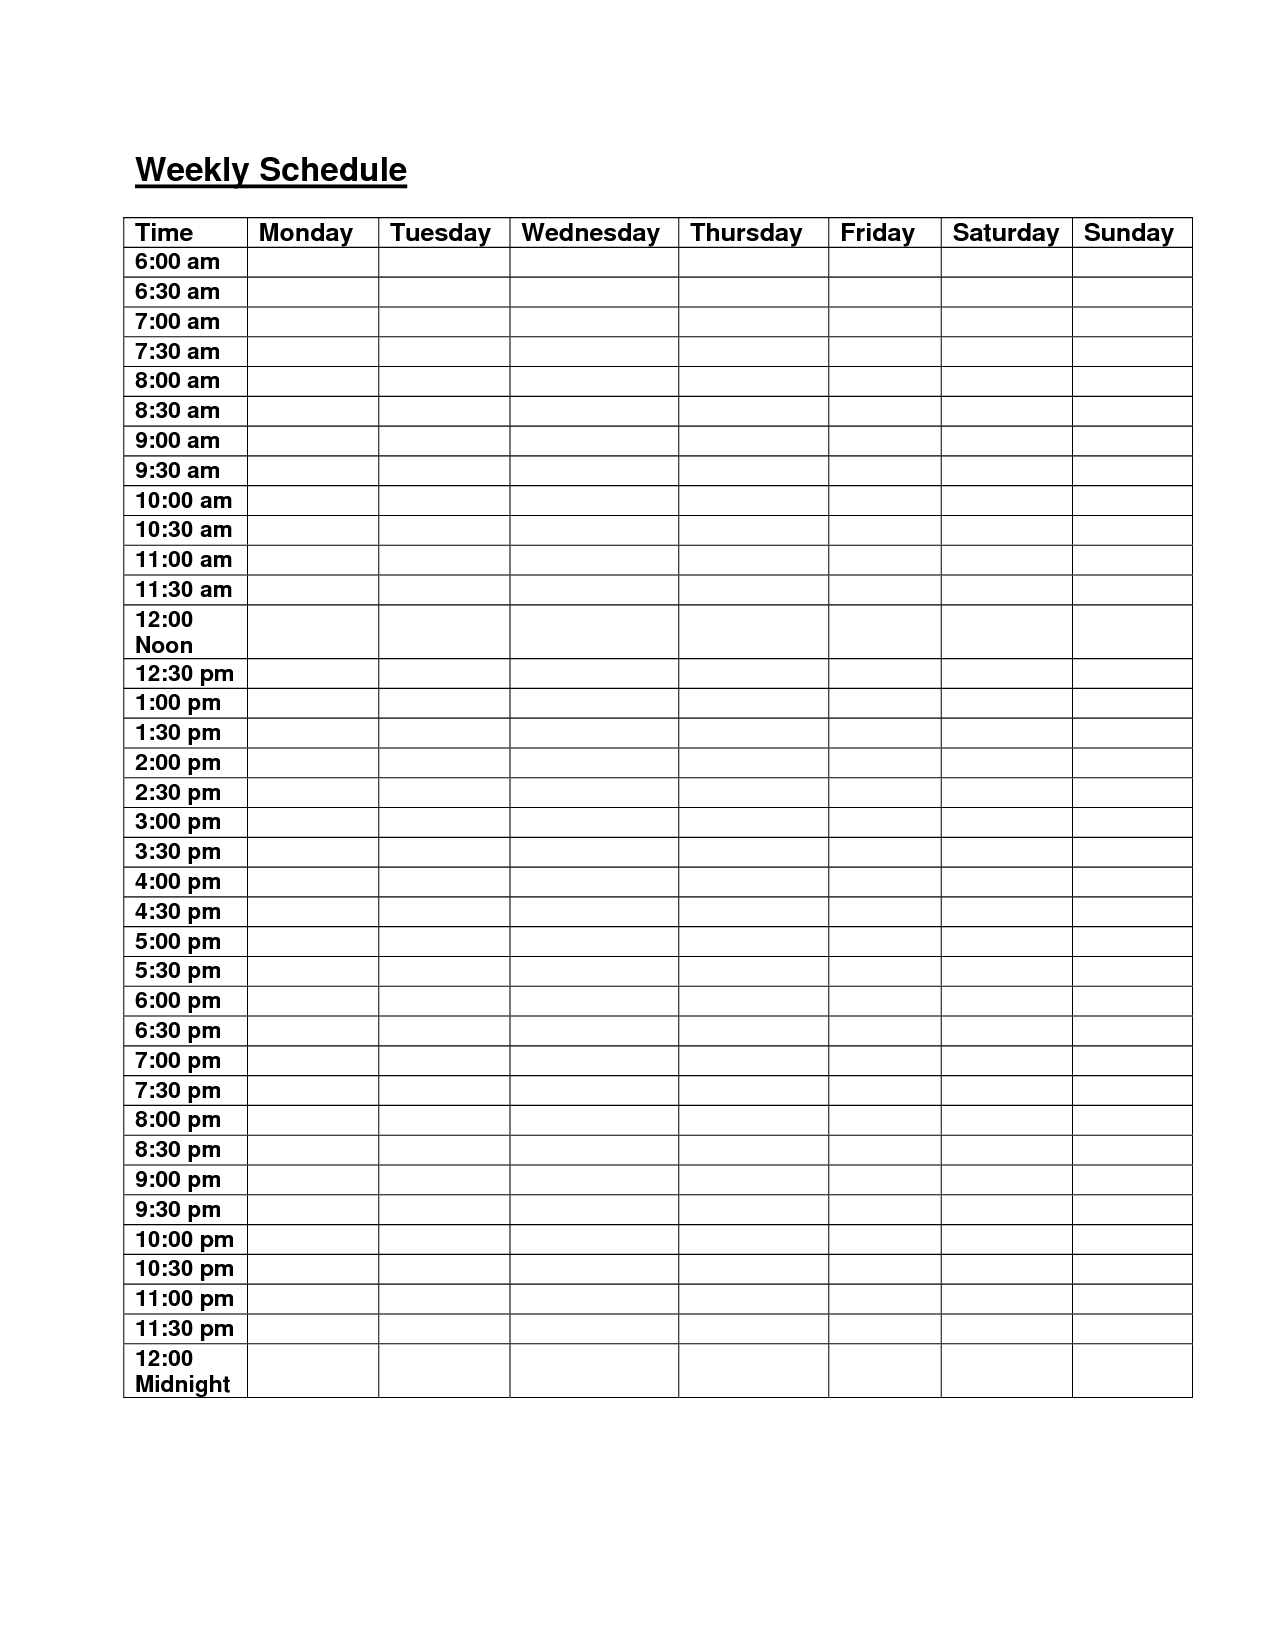 6Am Midnight Hourly Weekly Schedule Planner | Daily for Weekly Hourly Calendar